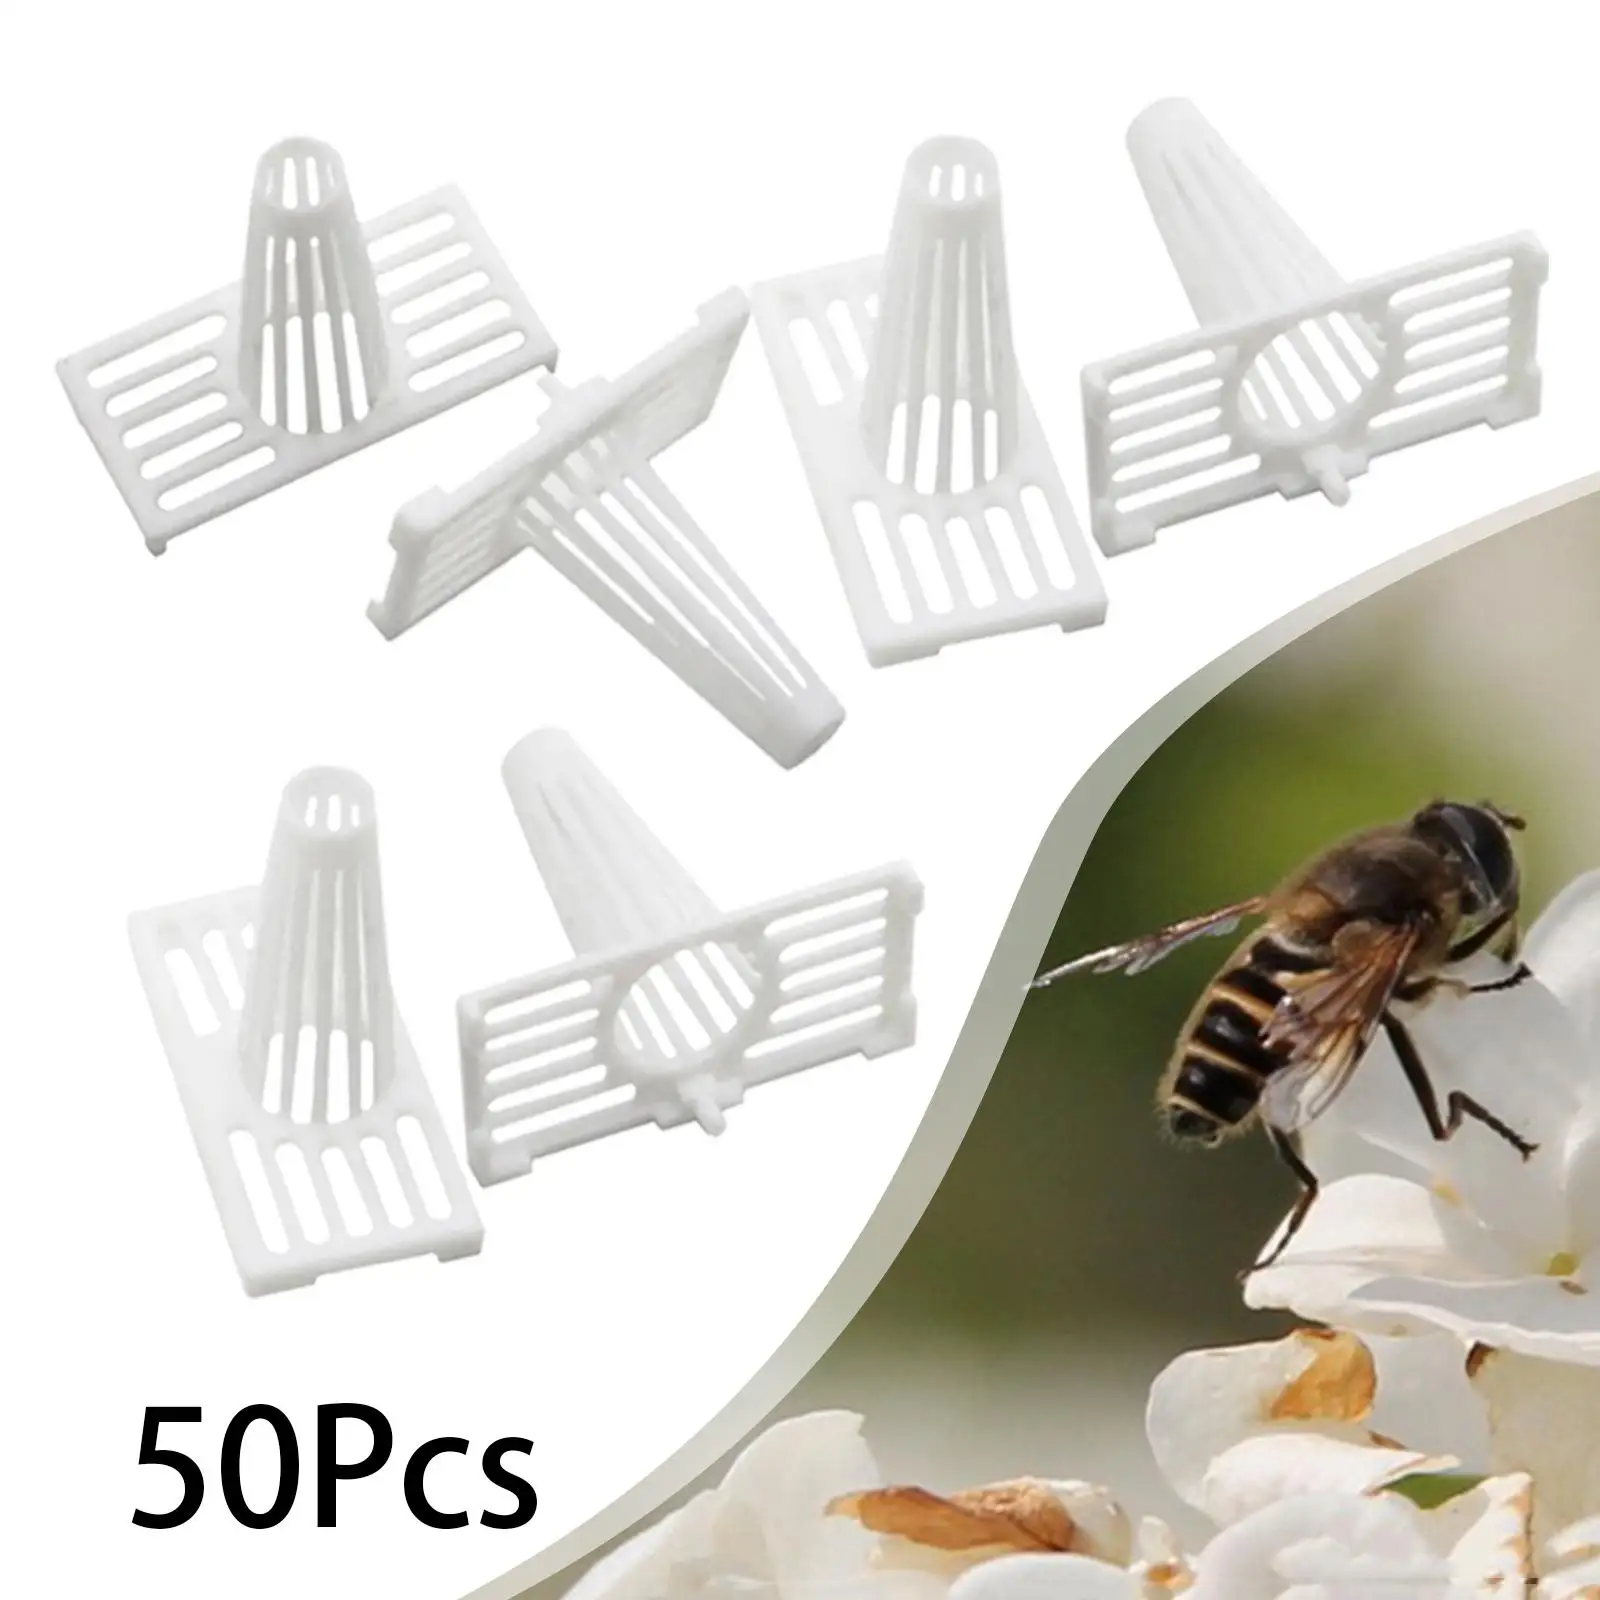 50 Pieces Bee Hive Frame Nest Gate Apiculture Bee Tool for Outdoor Workshop